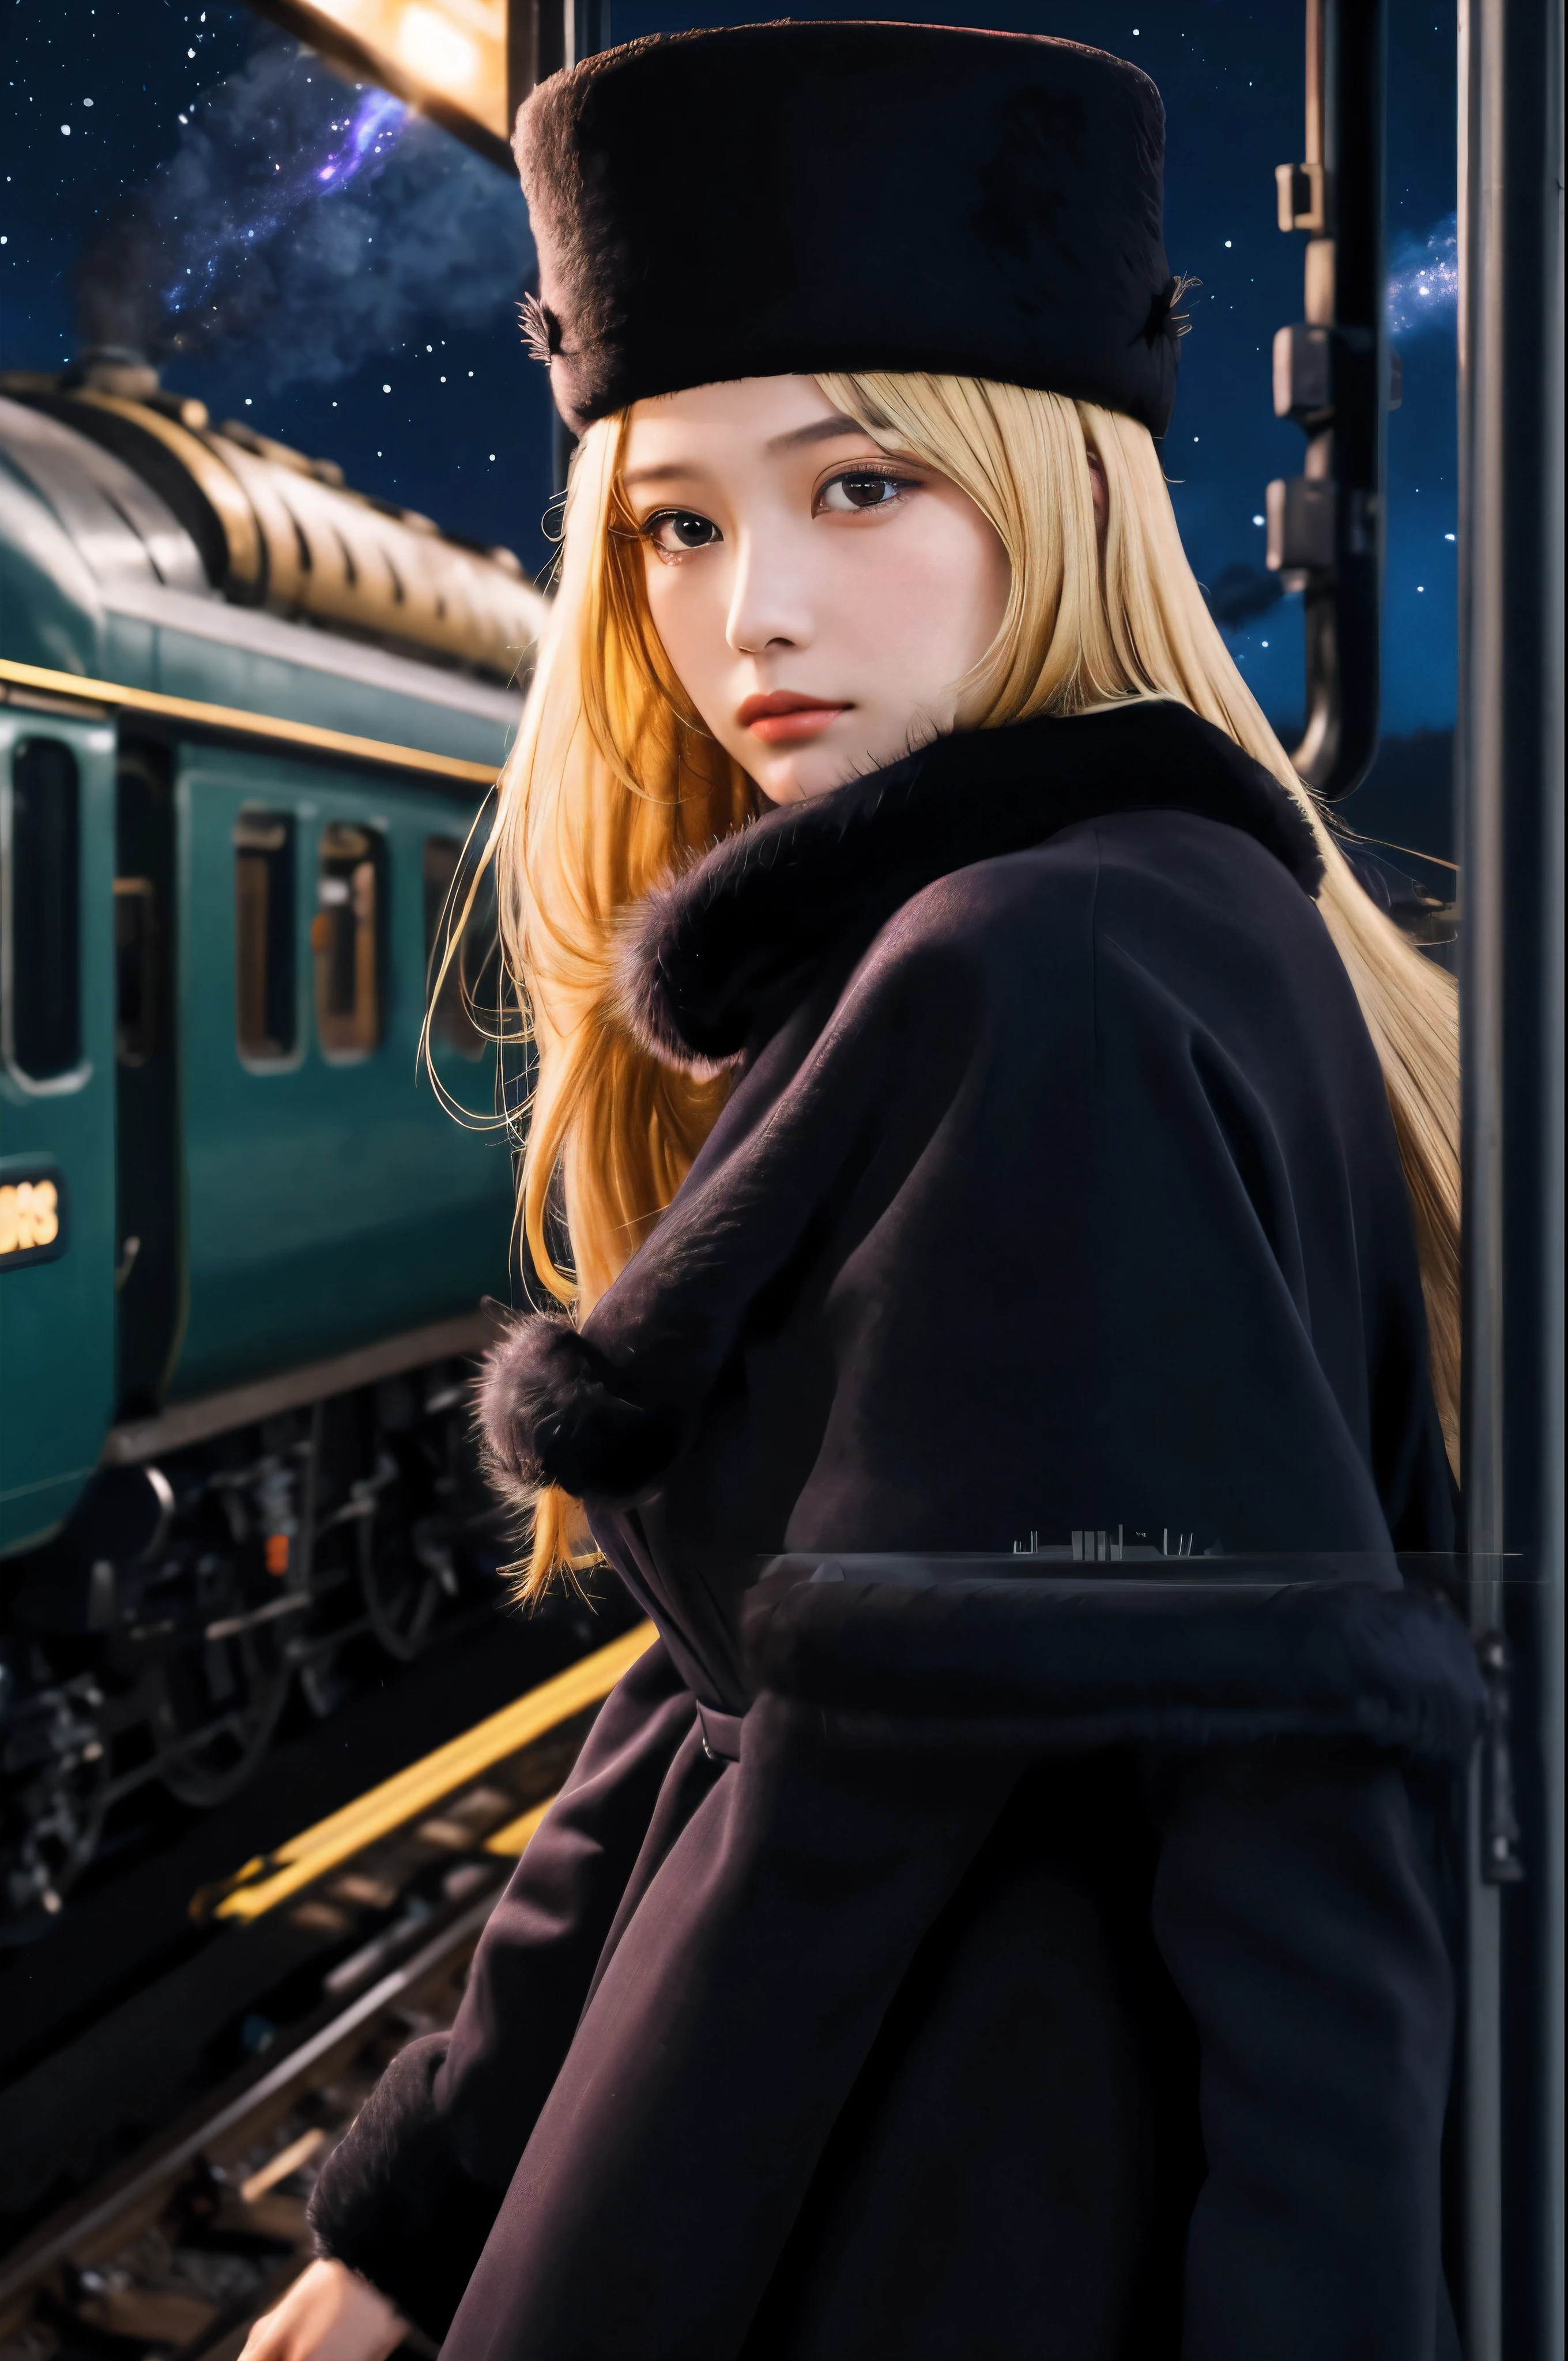 highest quality, Super quality,, RAW Photos, Realistic, Incredibly absurd, Very detailed, delicate, Flashy and dynamic depiction, Galaxy Express 999, Material, Long Hair, Blonde Hair, Fur trim, Black Hat, Fur has, dress, Dynamic Angle、Beautiful and cool woman, sad, Fleeting, Melancholic expression, Sharp eyes, Sharp Face, Slender and perfect proportions, Tight waist, Long eyelashes, Detailed pupil, Detailed skin texture, Background Galaxy, night, Station platform, Steam locomotive station, luggage